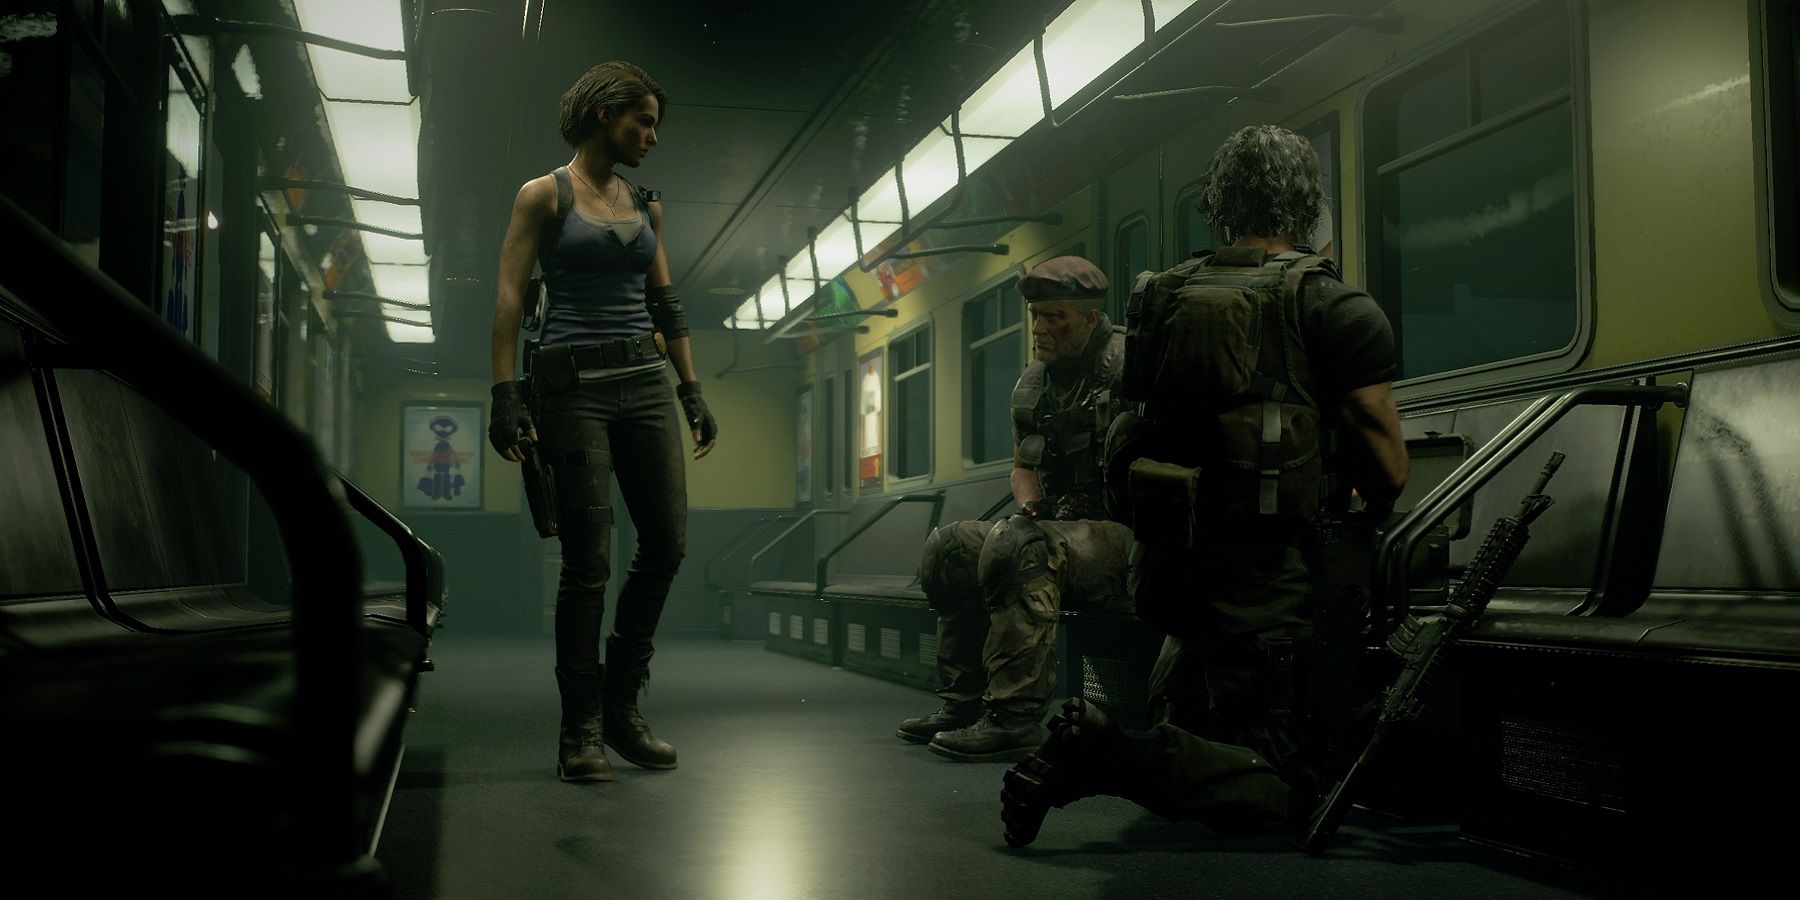 Screenshot from the Resident Evil 3 remake showing Jill on the train with Mikhail and Carlos.